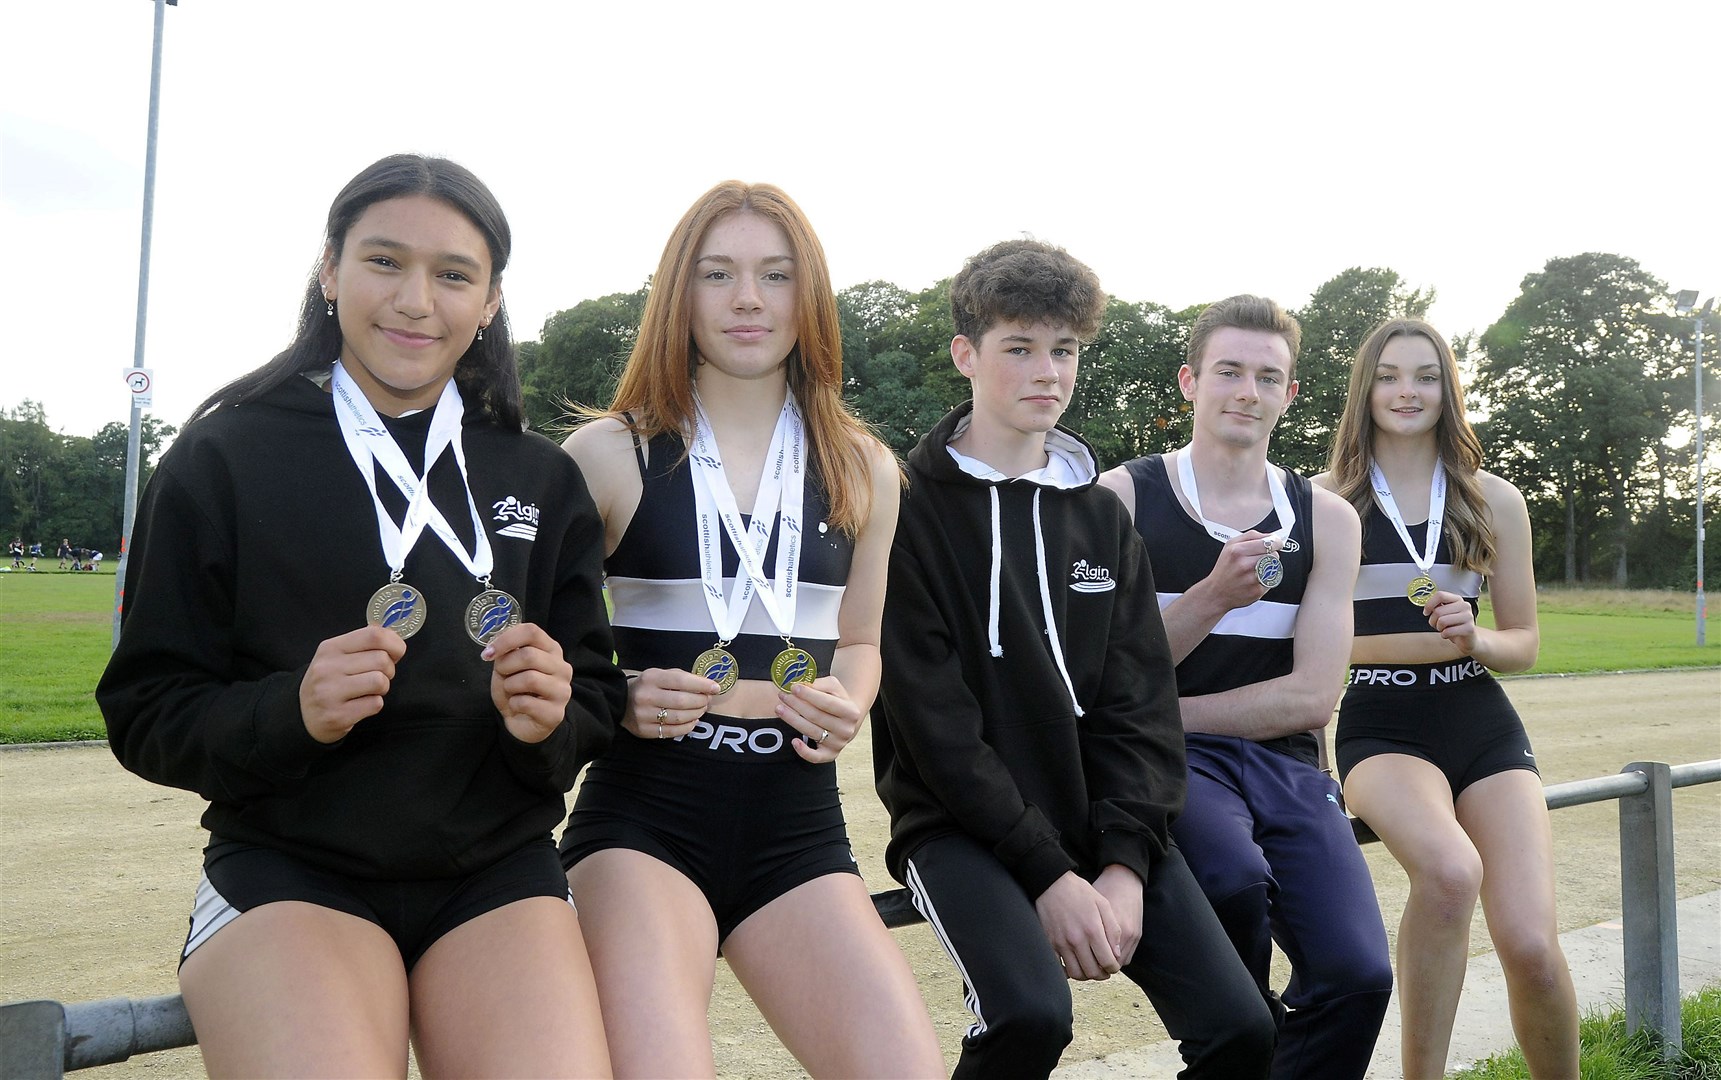 Elgin AAC's Scottish championship medallists, from left: Tasmin Fowlie, Holly Whittaker, Tom Palmer, Kyle Wilkinson and Lexi Grant. Picture: Becky Saunderson..